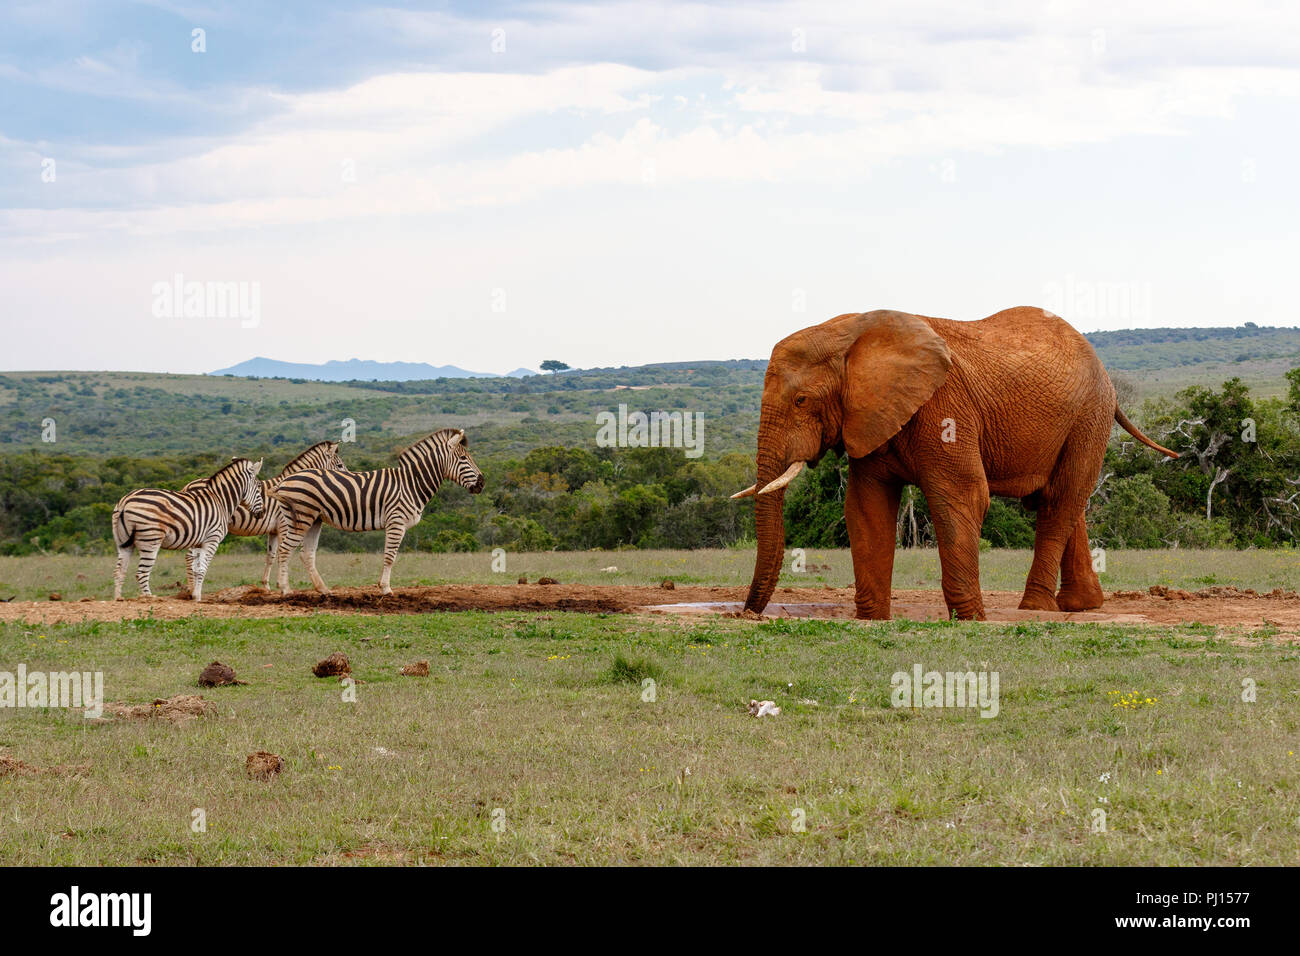 Elephant watching the zebras at the watering hole. Stock Photo